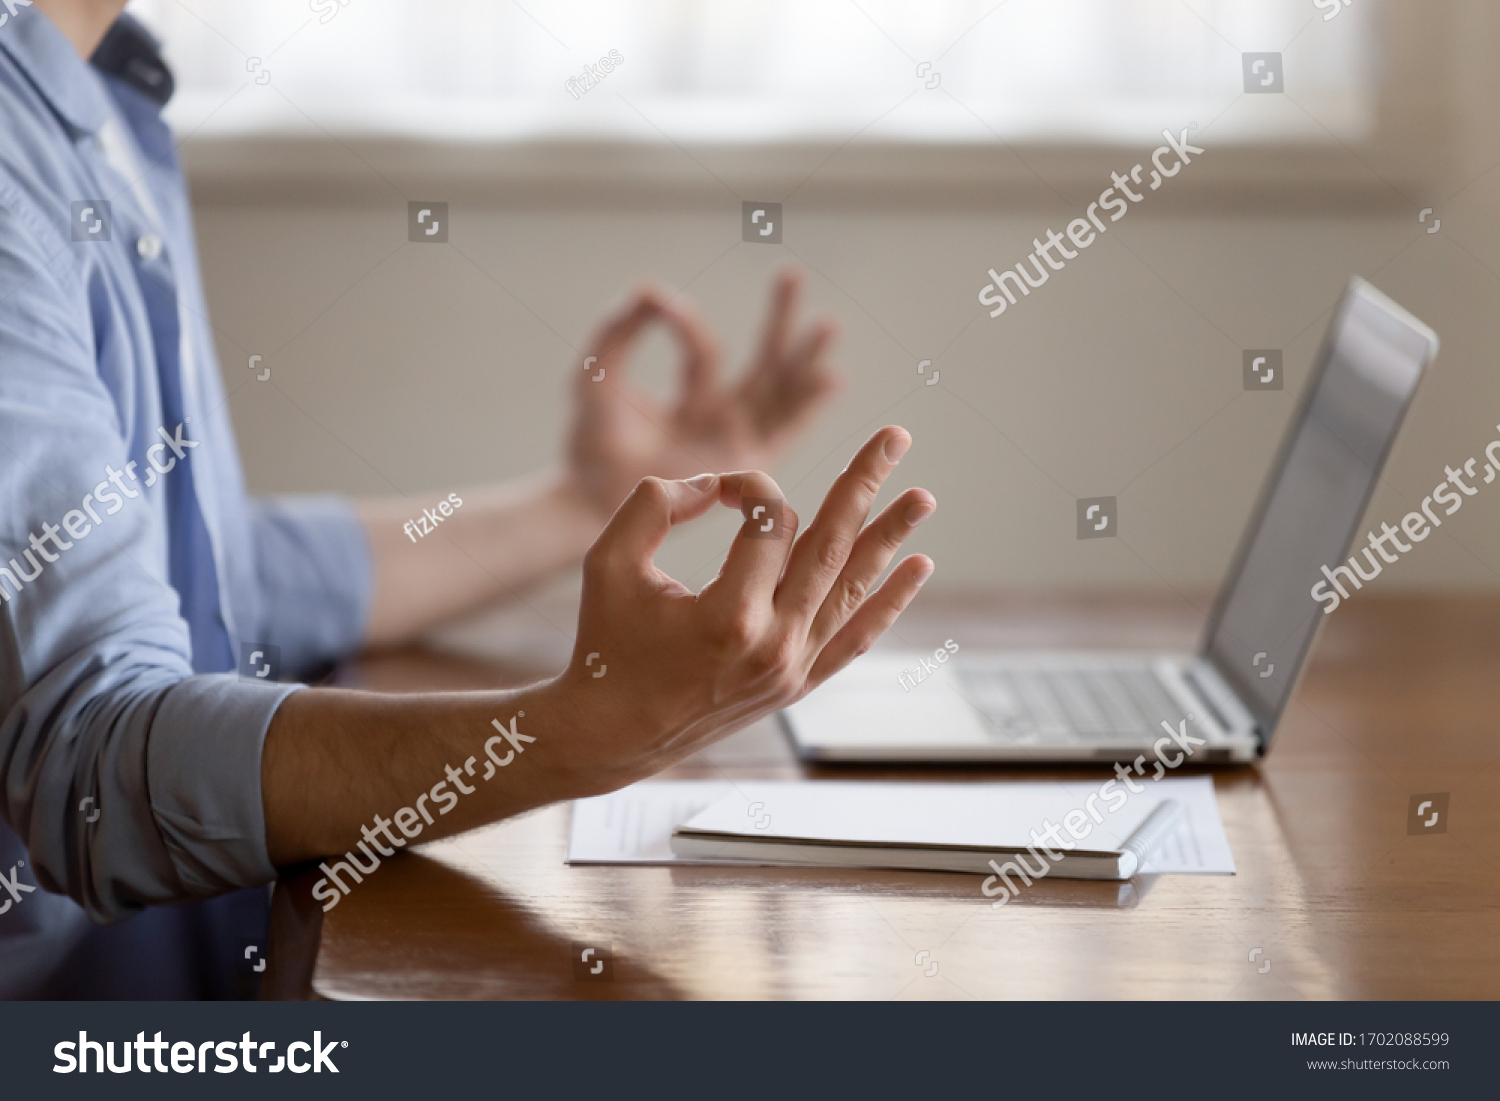 Close up focus on folded in mudra gesture male hands. Young peaceful man managing stress at workplace, meditating, calming down, doing yoga breathing exercises, sitting at table alone indoors. #1702088599